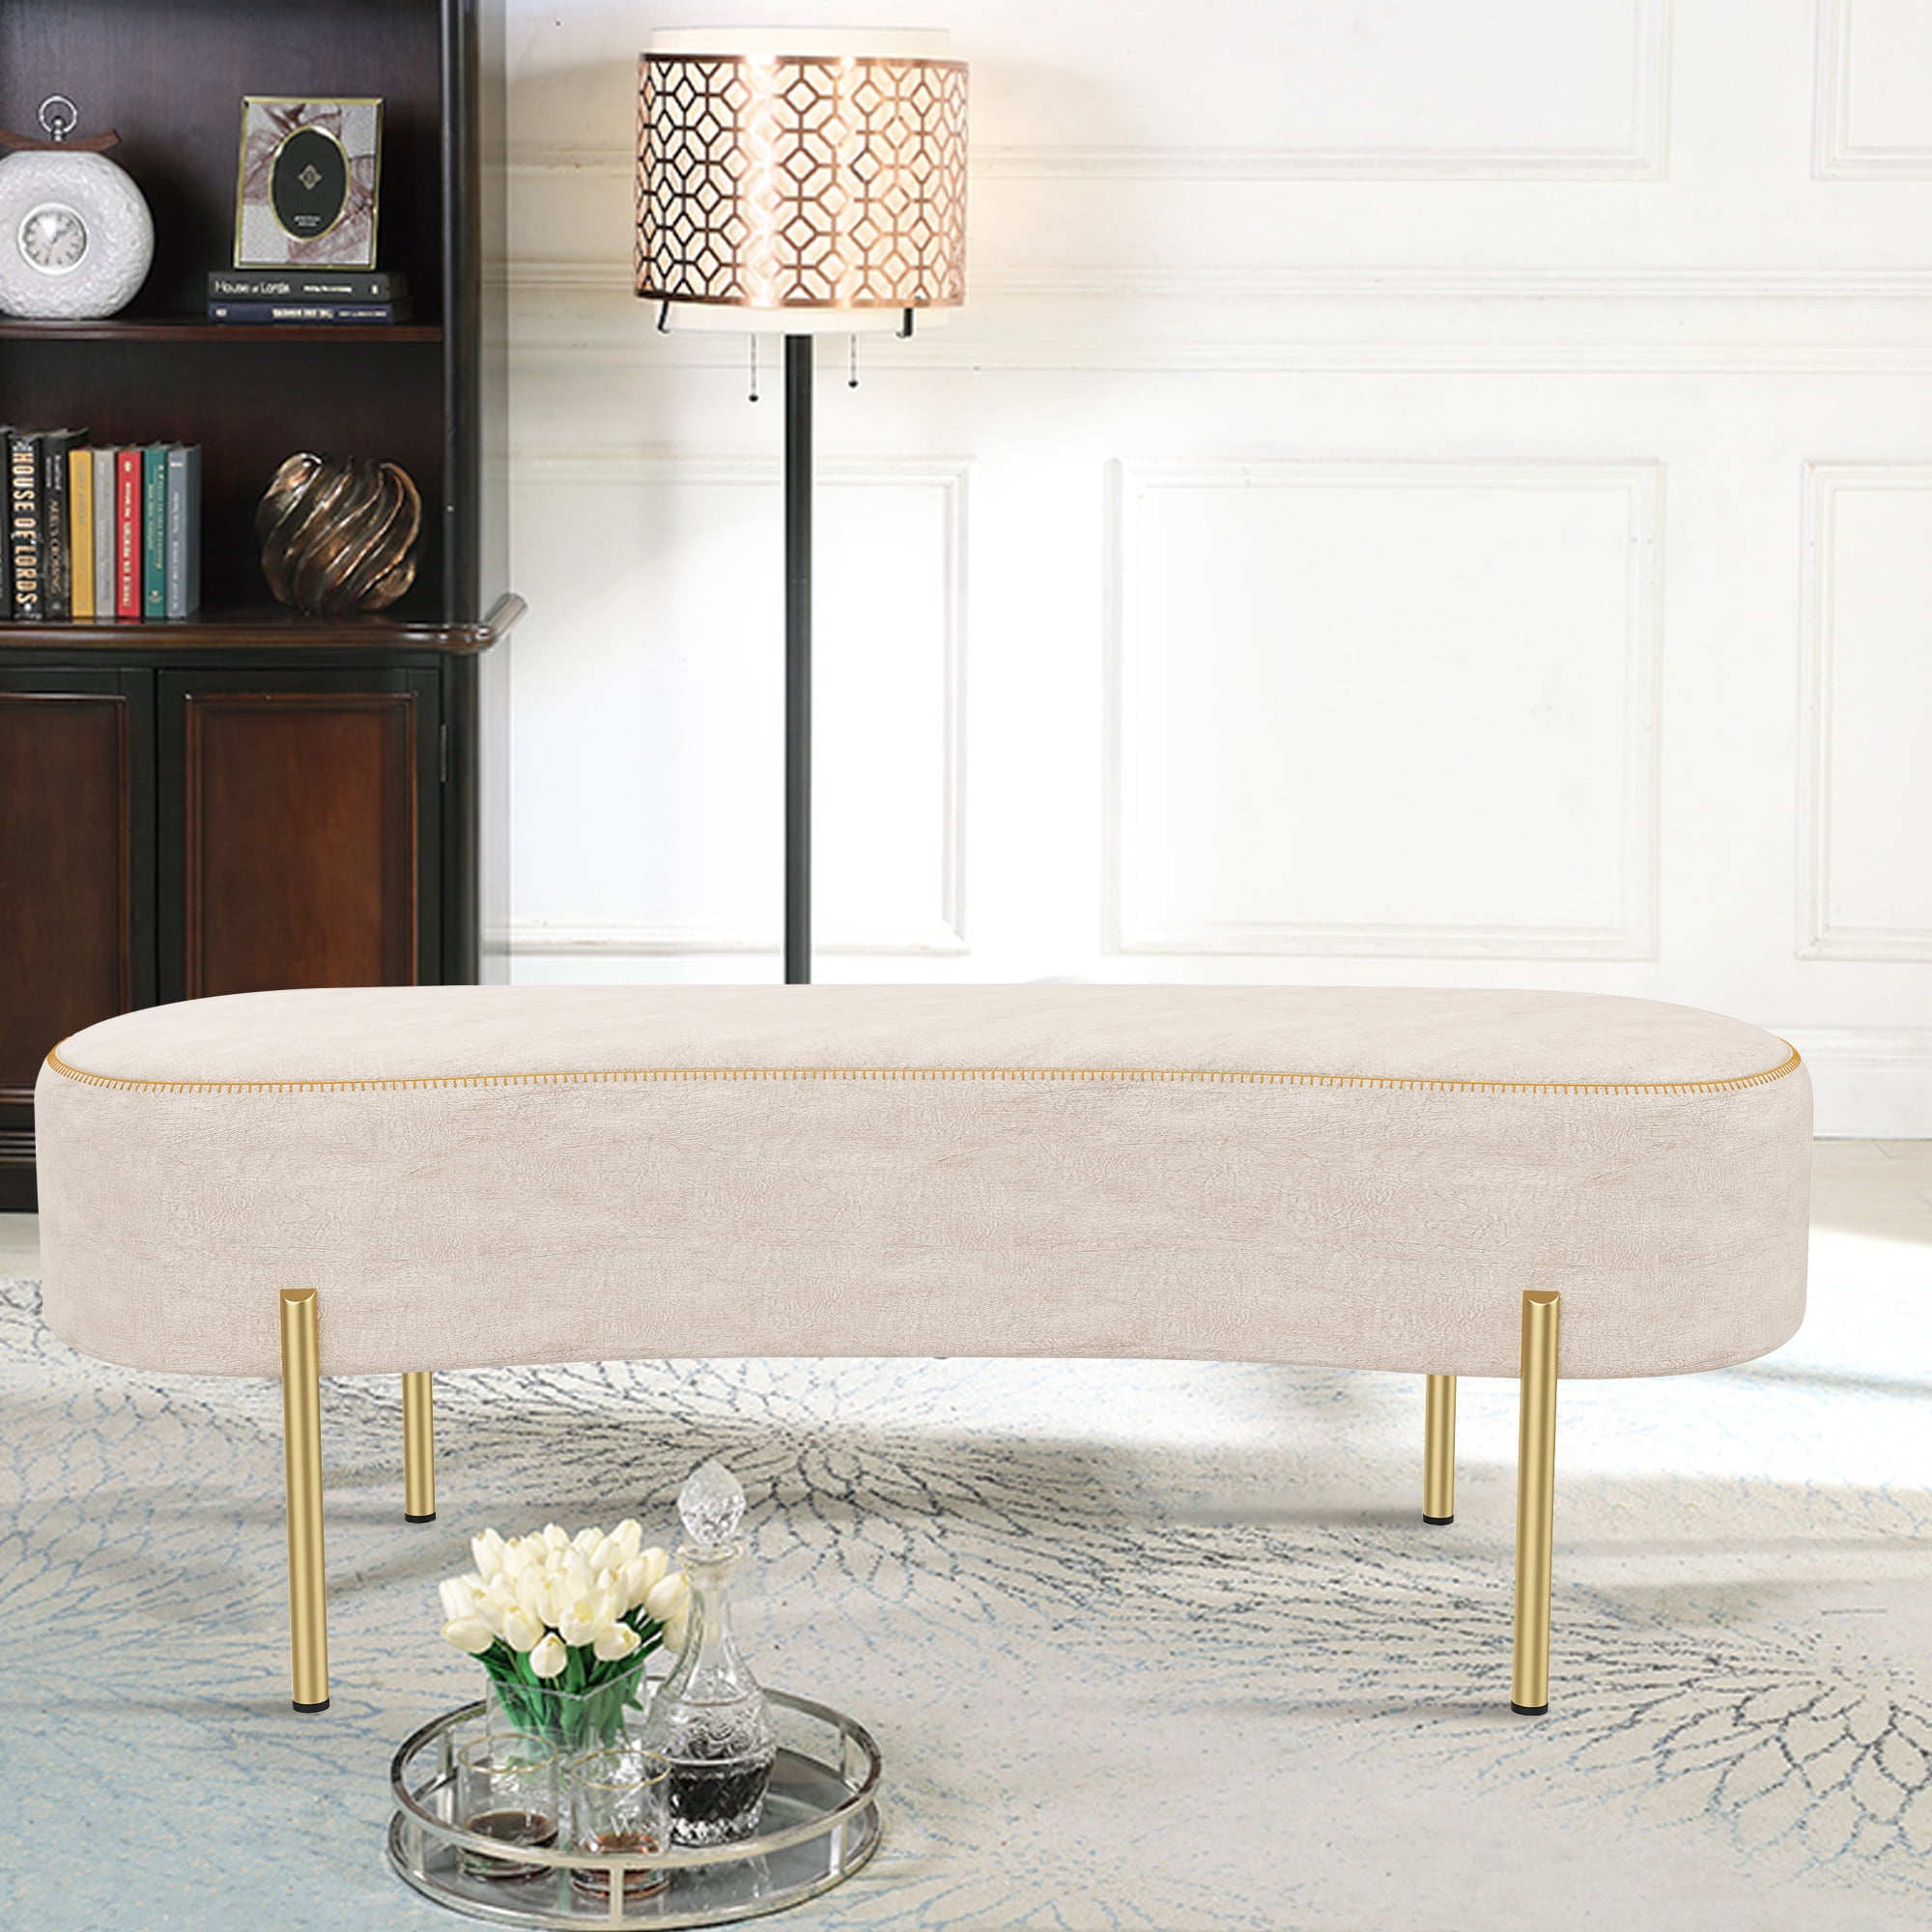 Andeworld Indoor Bench Benches(Beige) Seat Living Upholstered Room Bench Gold Ottoman Bench Bedroom for with Legs,Sitting